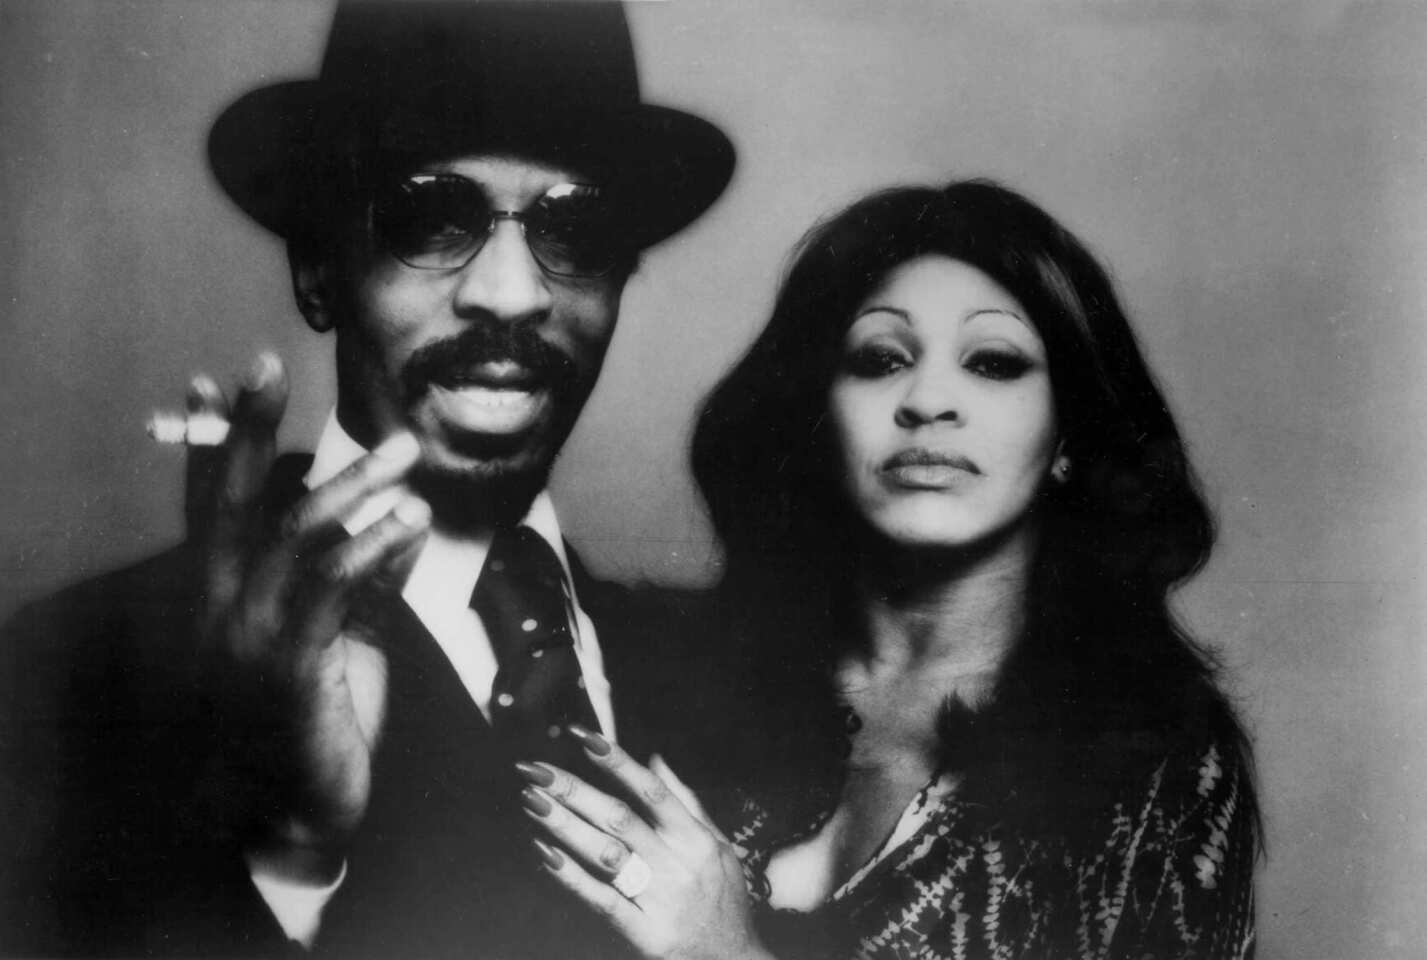 In 1974, husband-and-wife singing duo Ike and Tina Turner got into a vicious spat before a concert in Dallas. Ike allegedly started the fight by slapping the back of her head, according to Tina's memoir. When the two emerged from a limousine, they each were severely bloodied and bruised with Tina's eyes almost sealed shut and Ike's nose bloodied. Tina described it as the one time she fought back against her husband. "The problem is that there are two sides to every story and they only printed the bad side," Ike told The Times in 1991 on the day he was released after 18 months in prison for probation and drug-related violations. "I regret that I've screwed up my life, but I'm not ashamed of nothing I did." "I took everything God gave me for granted: Tina, my family, my career," Ike said in a later interview. "When me and Tina broke up, man, I panicked. I got so insecure. I thought the public would reject me without her. I knew I was in real bad shape, but I couldn't stop." Tina filed for divorce in 1974 and the 14-year marriage officially ended in 1978.